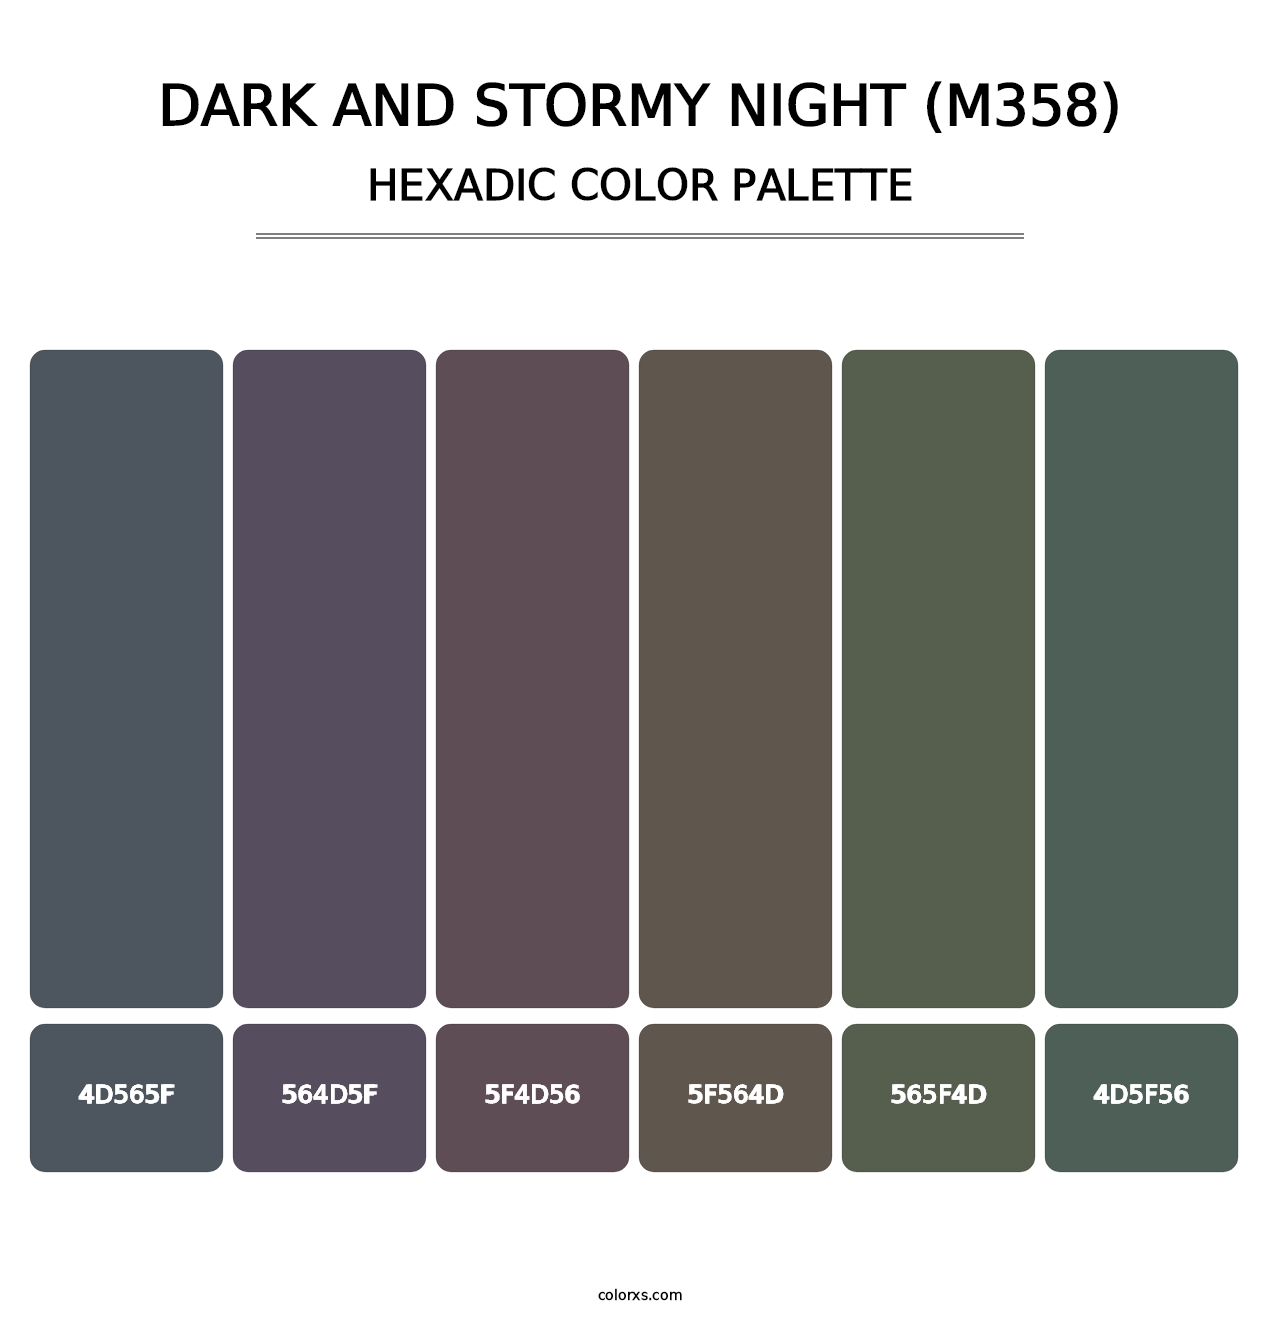 Dark and Stormy Night (M358) - Hexadic Color Palette